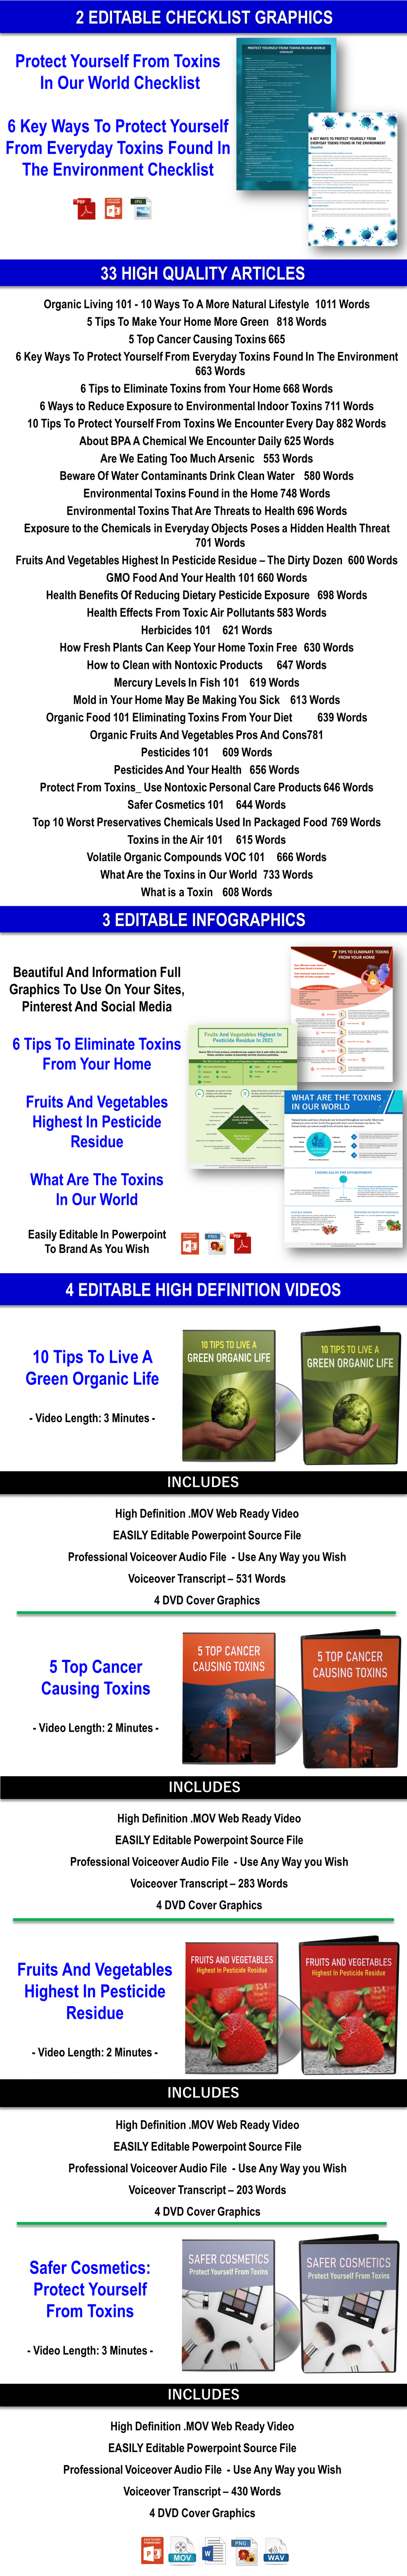 Living An Organic Life: Mitigating Toxin Exposure Content with PLR Rights